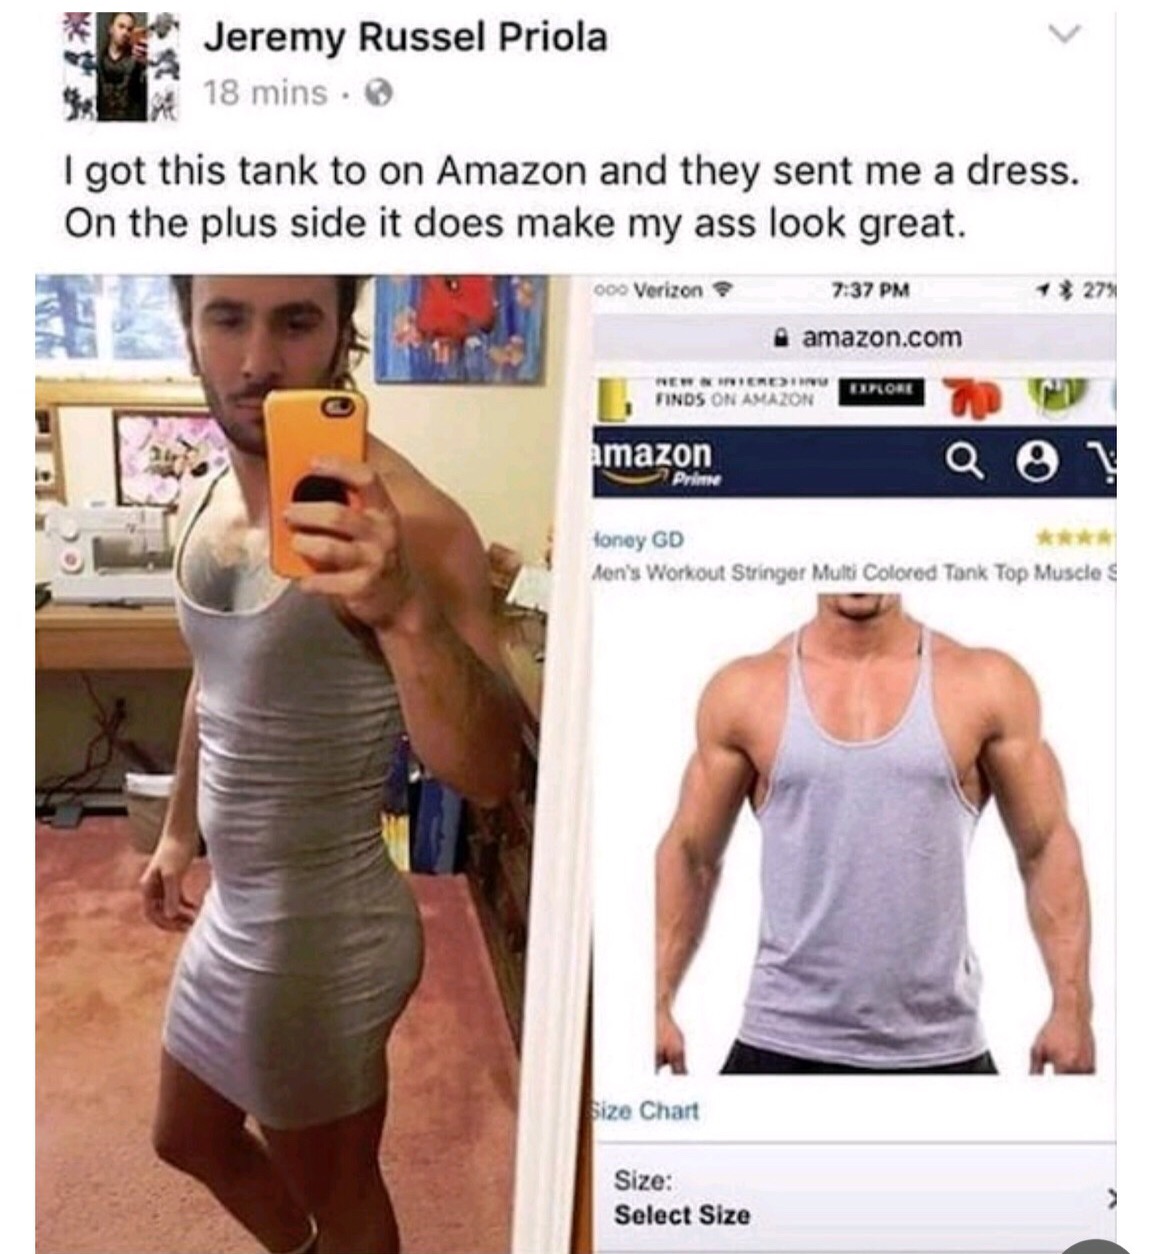 shopping fail - Jeremy Russel Priola 18 mins. I got this tank to on Amazon and they sent me a dress. On the plus side it does make my ass look great. 00Verizon 279 A amazon.com New Stero Urore Finds On Amazon Warlore amazon Prime foney Gd Aen's Workout St